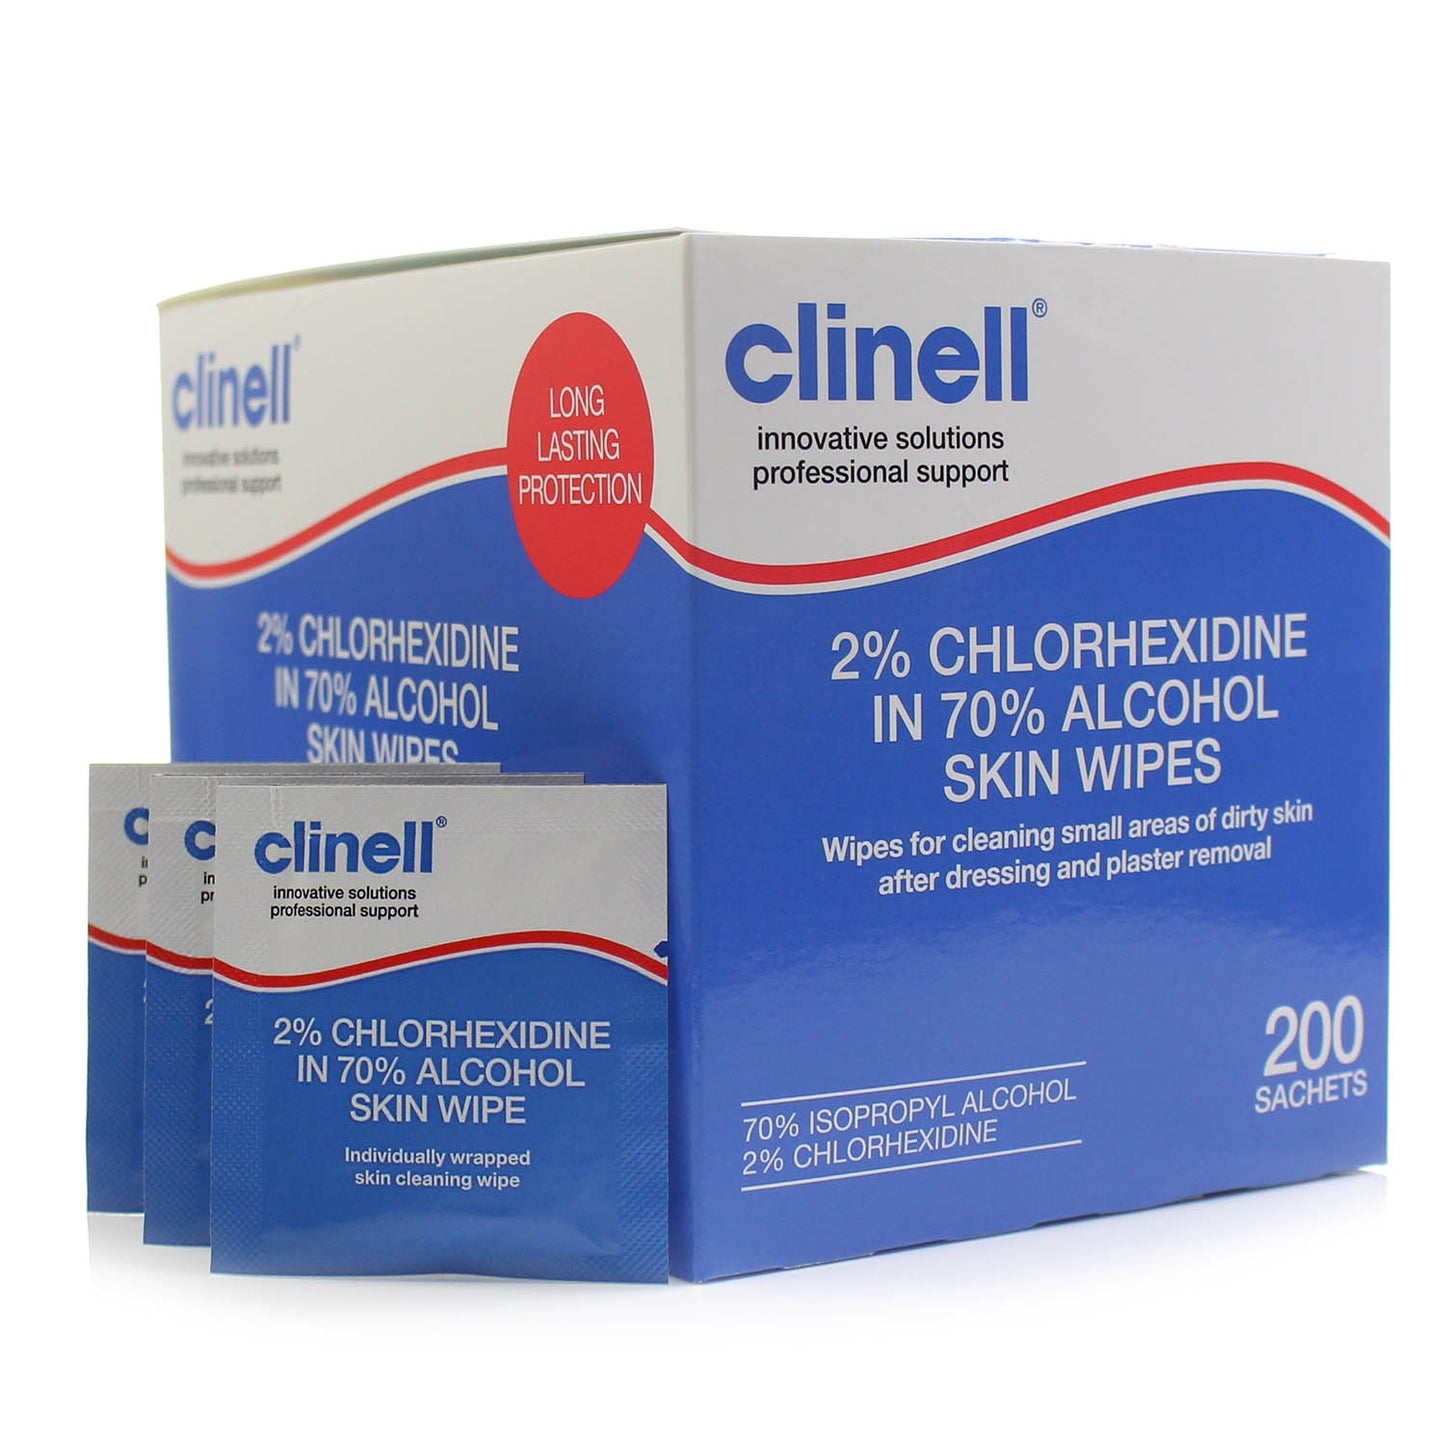 Clinell Alcoholic 2% Chlorhexidine Skin Wipes x 200 - Clearance